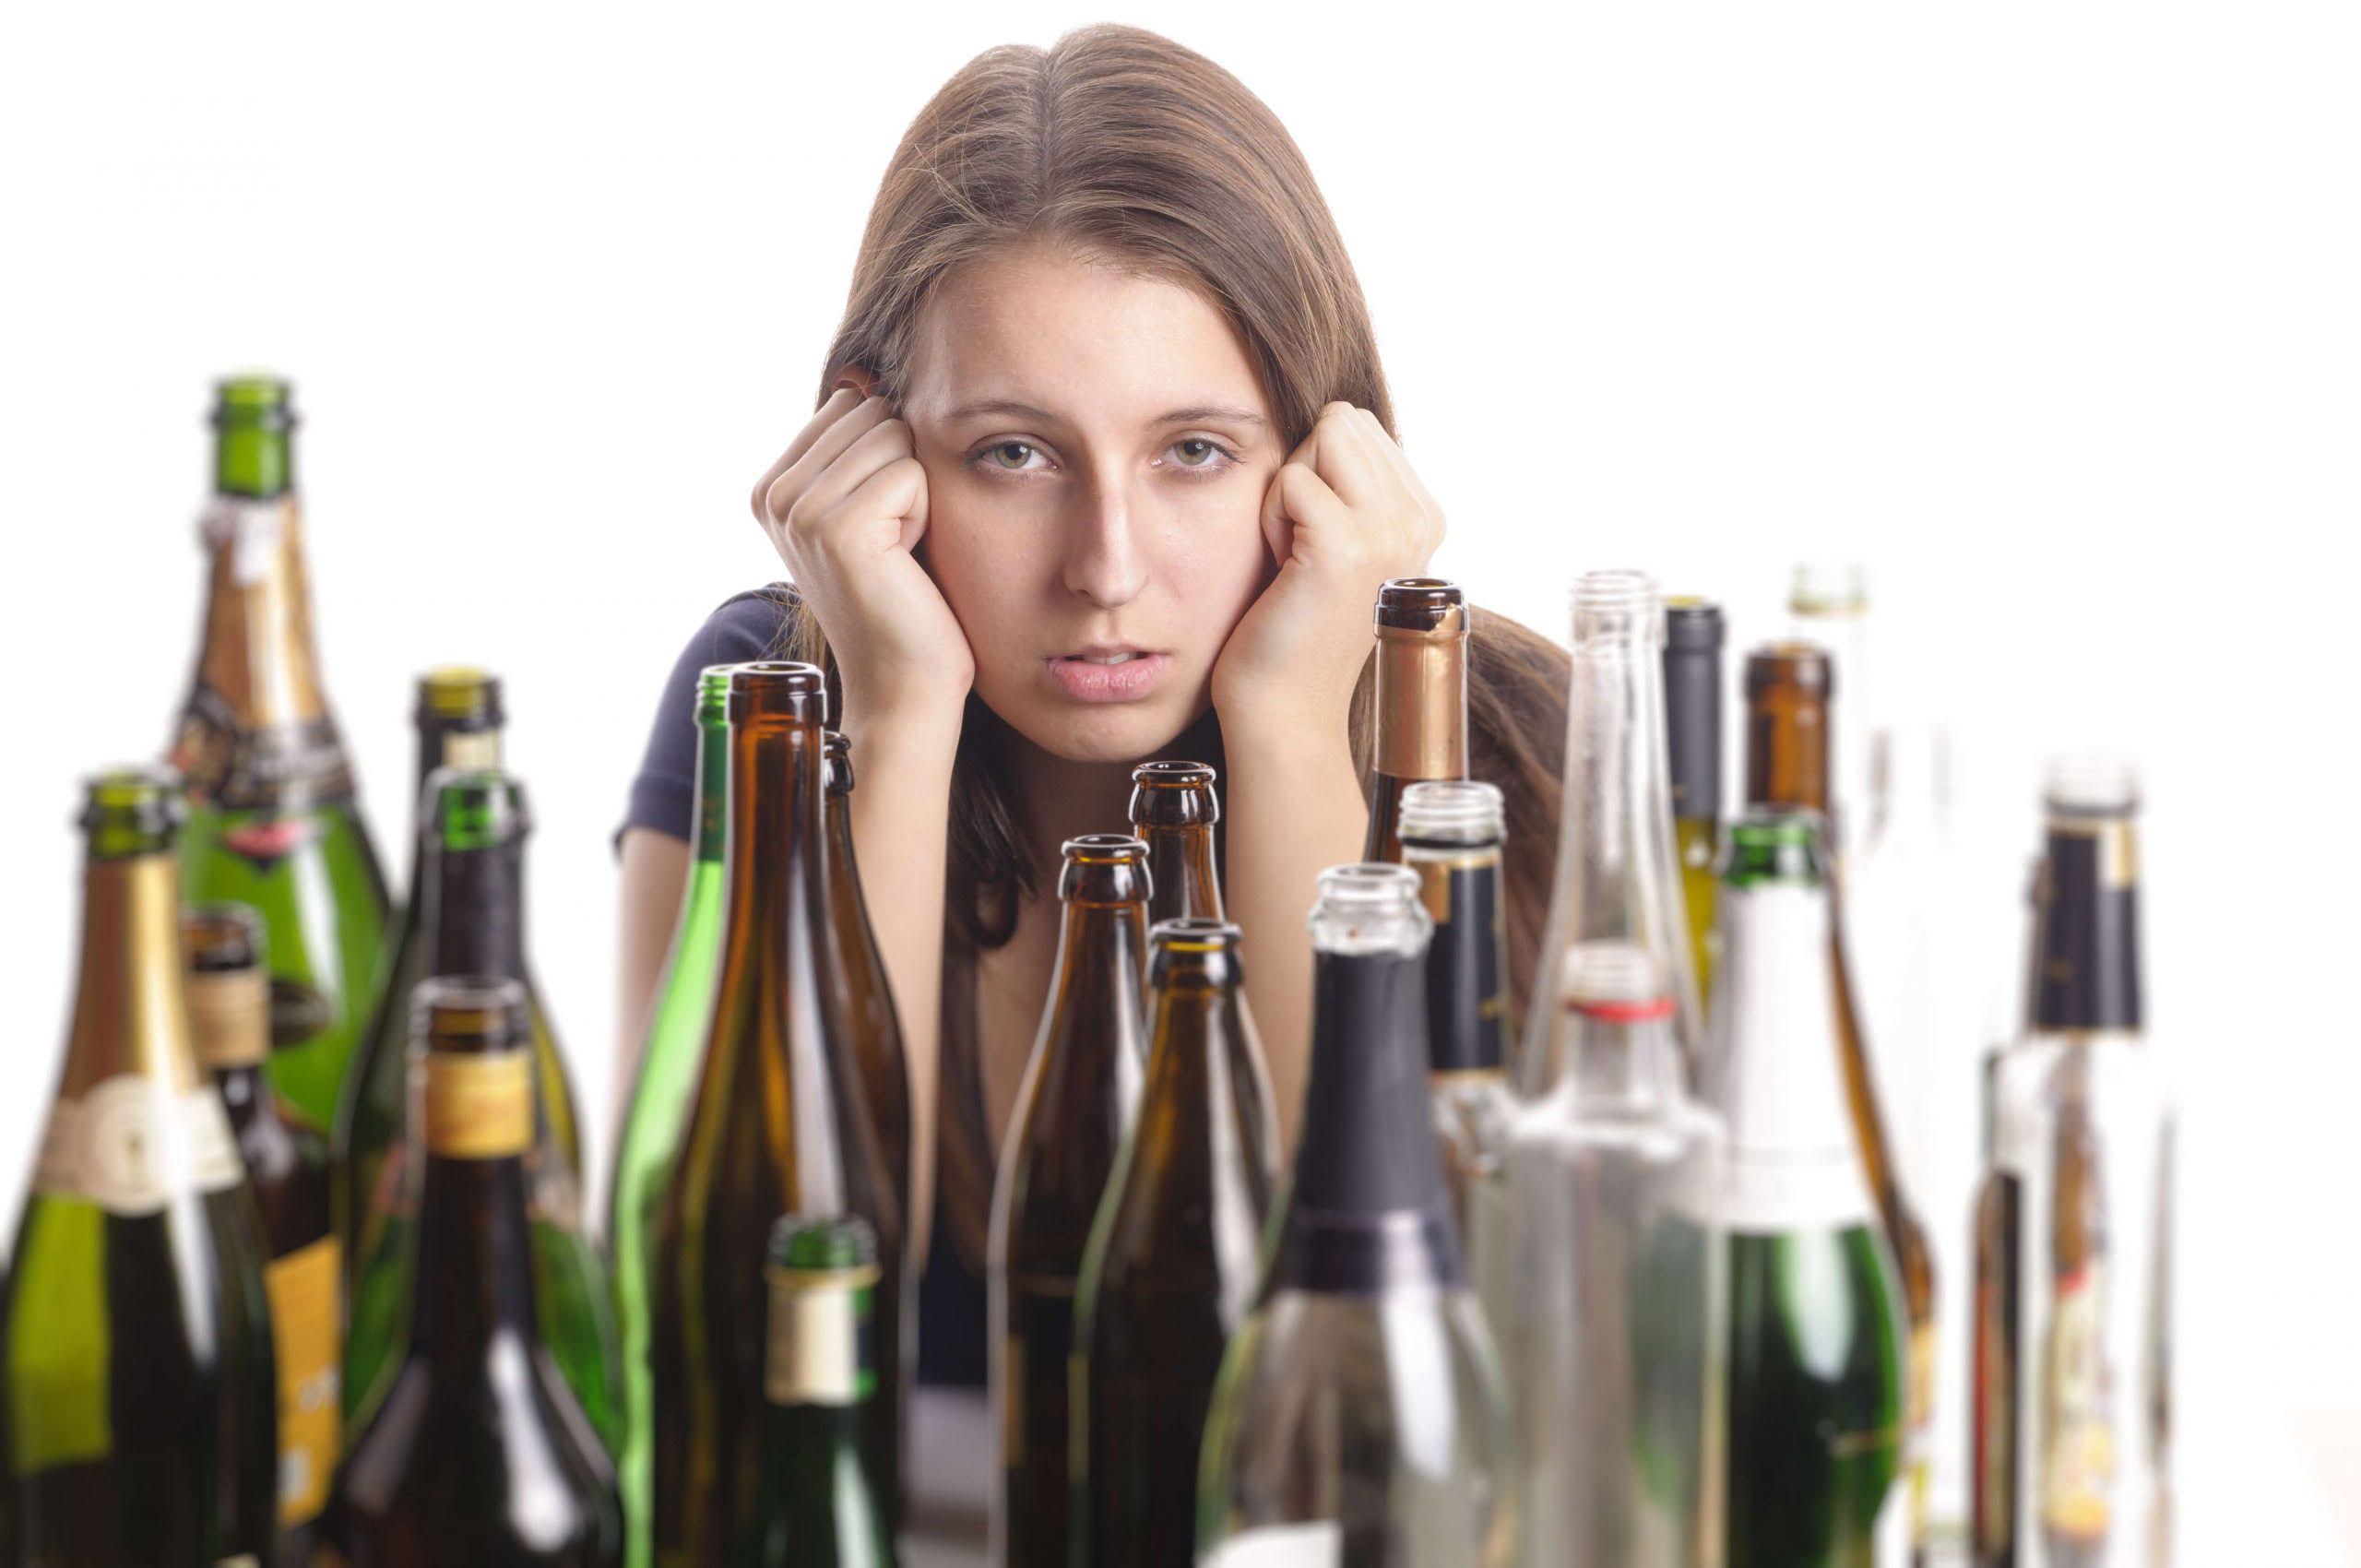 Feel guilty for drinking too much?